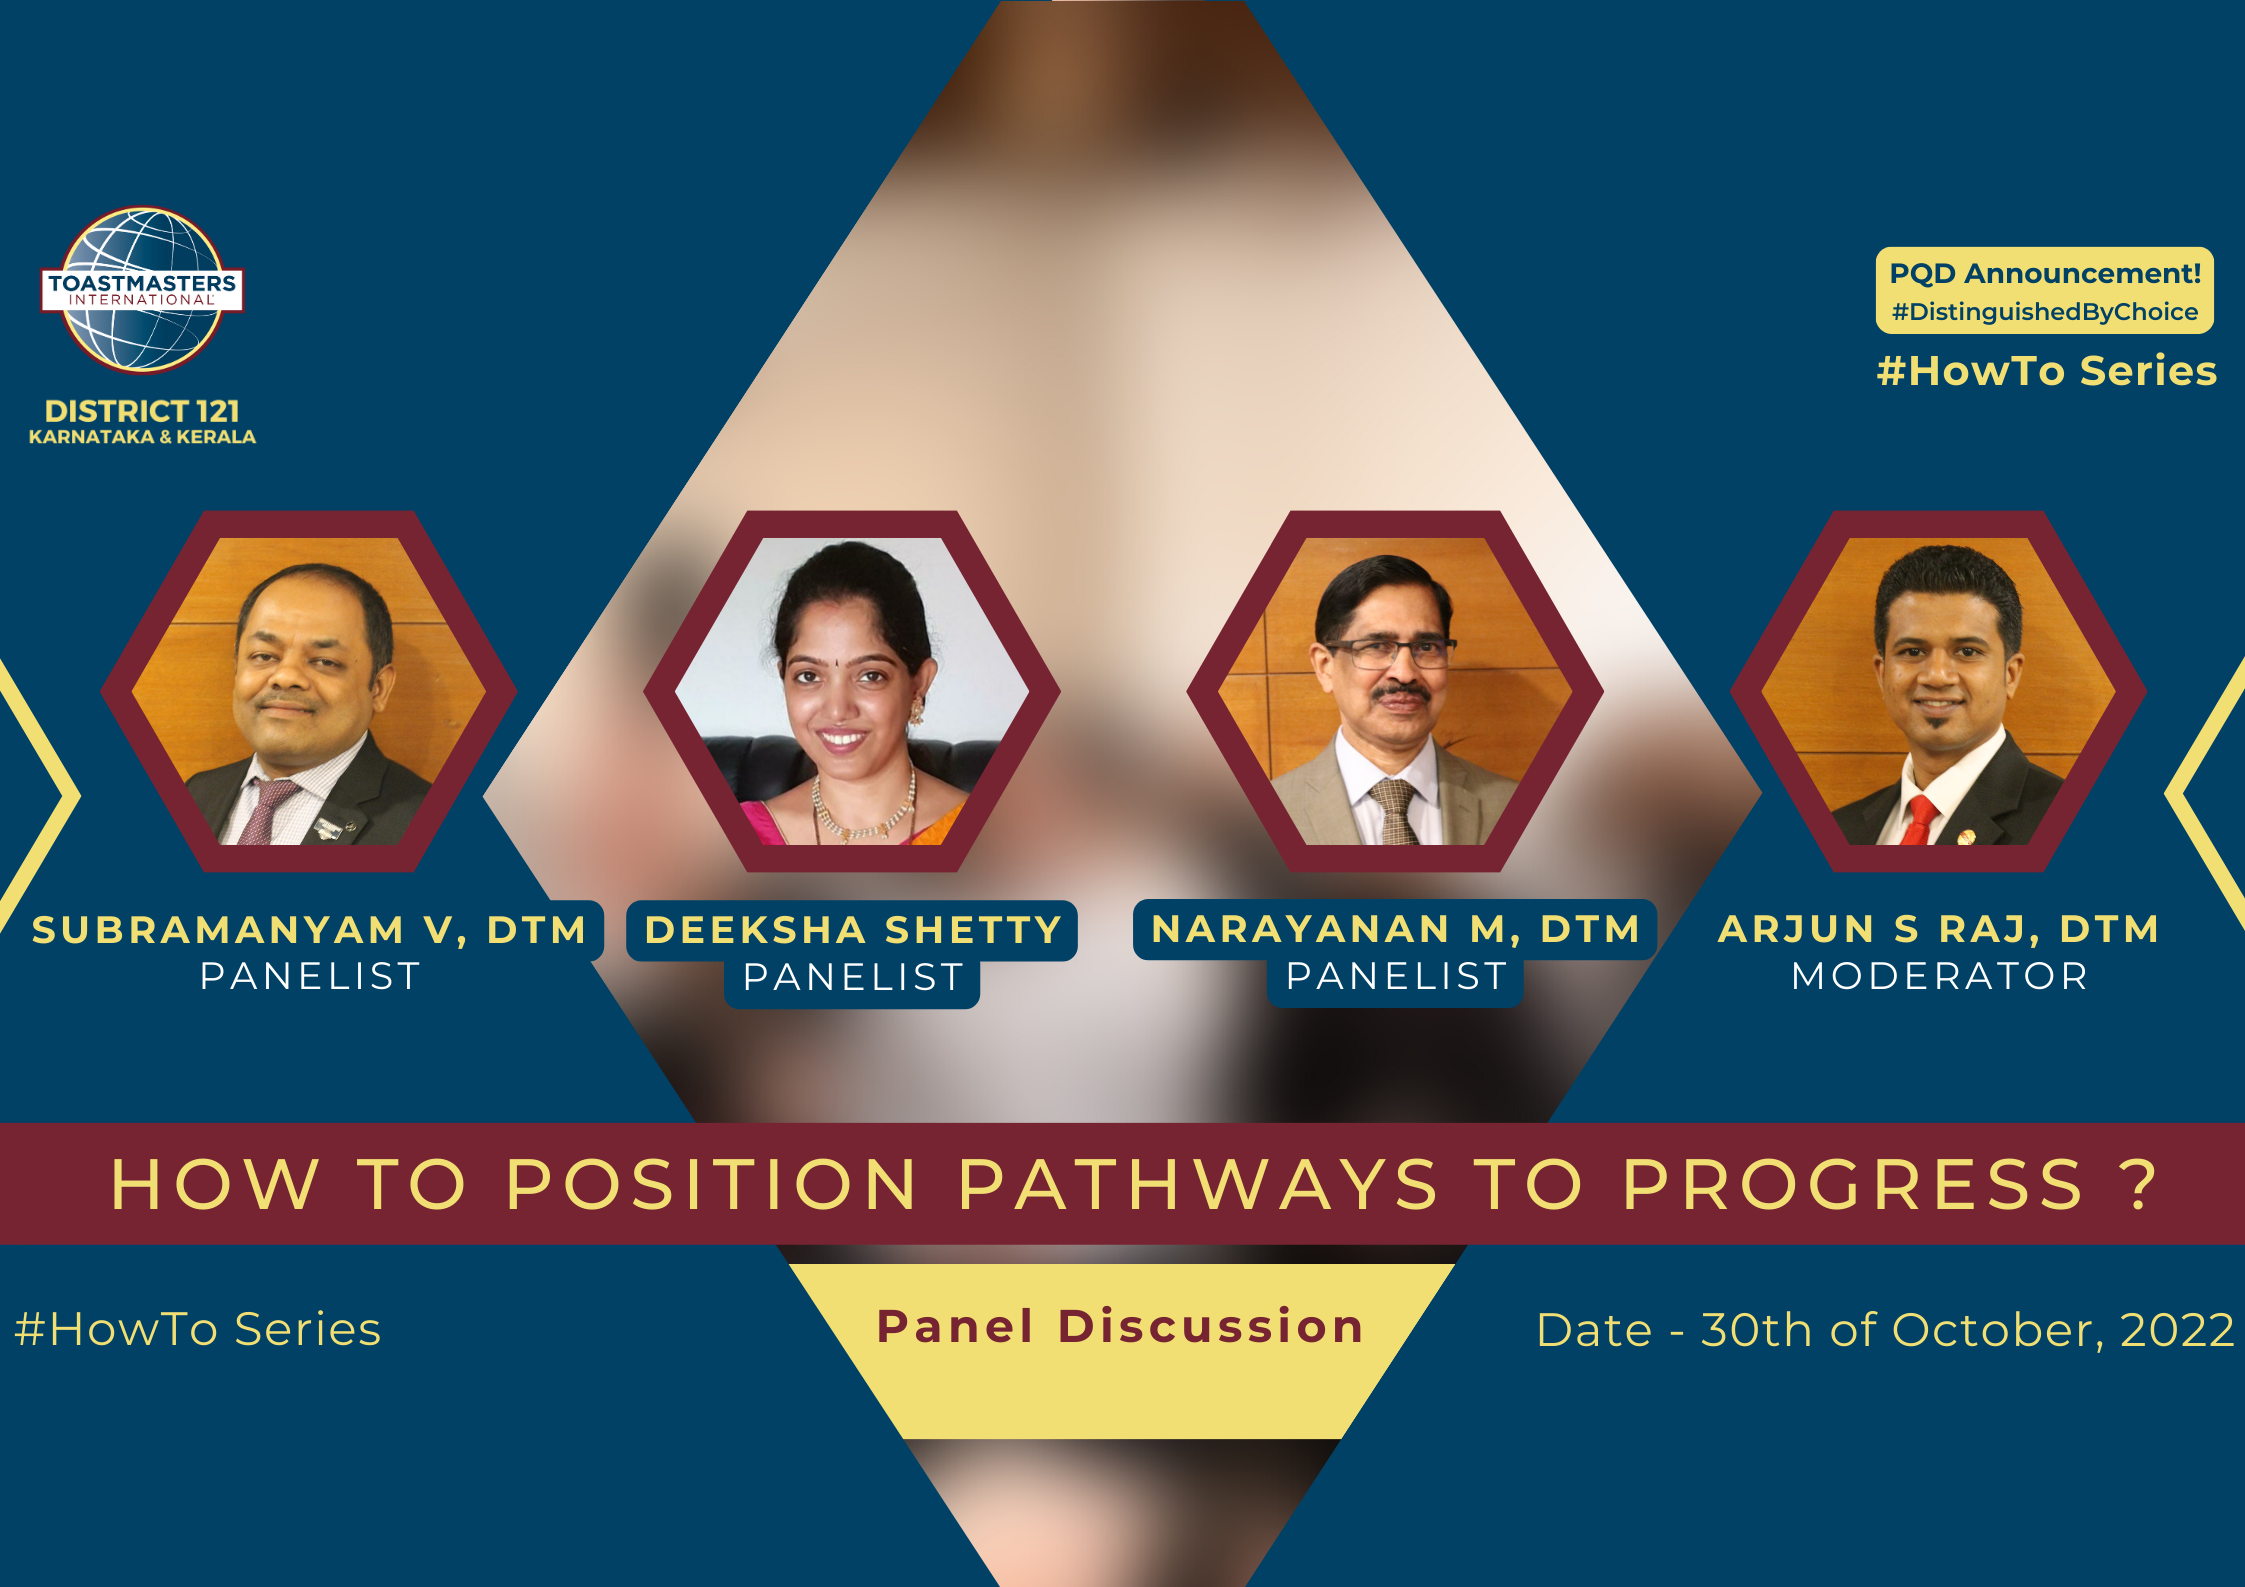 How to position pathways to progress